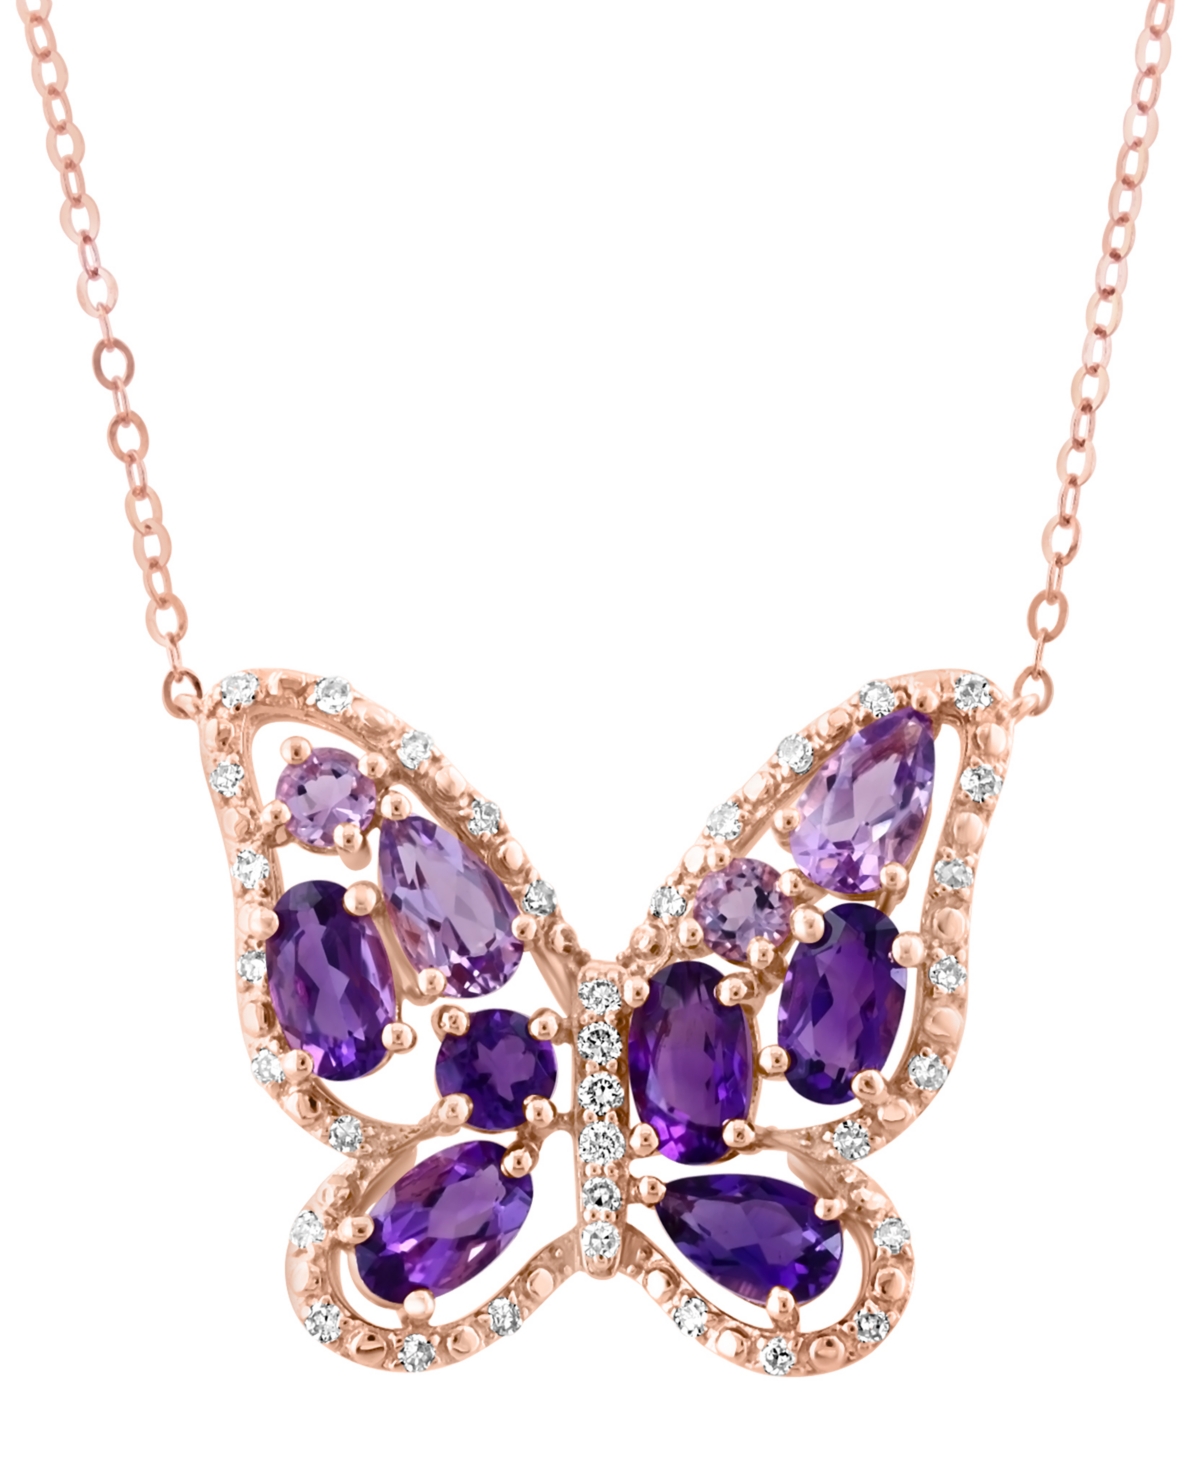 Lali Jewels Amethyst (1-1/4 ct. t.w.), Pink Amethyst (1/2 ct. t.w.) & Diamond (1/8 ct. t.w.) Butterfly Pendant Necklace in 14k Rose Gold, 16" + 2" extender